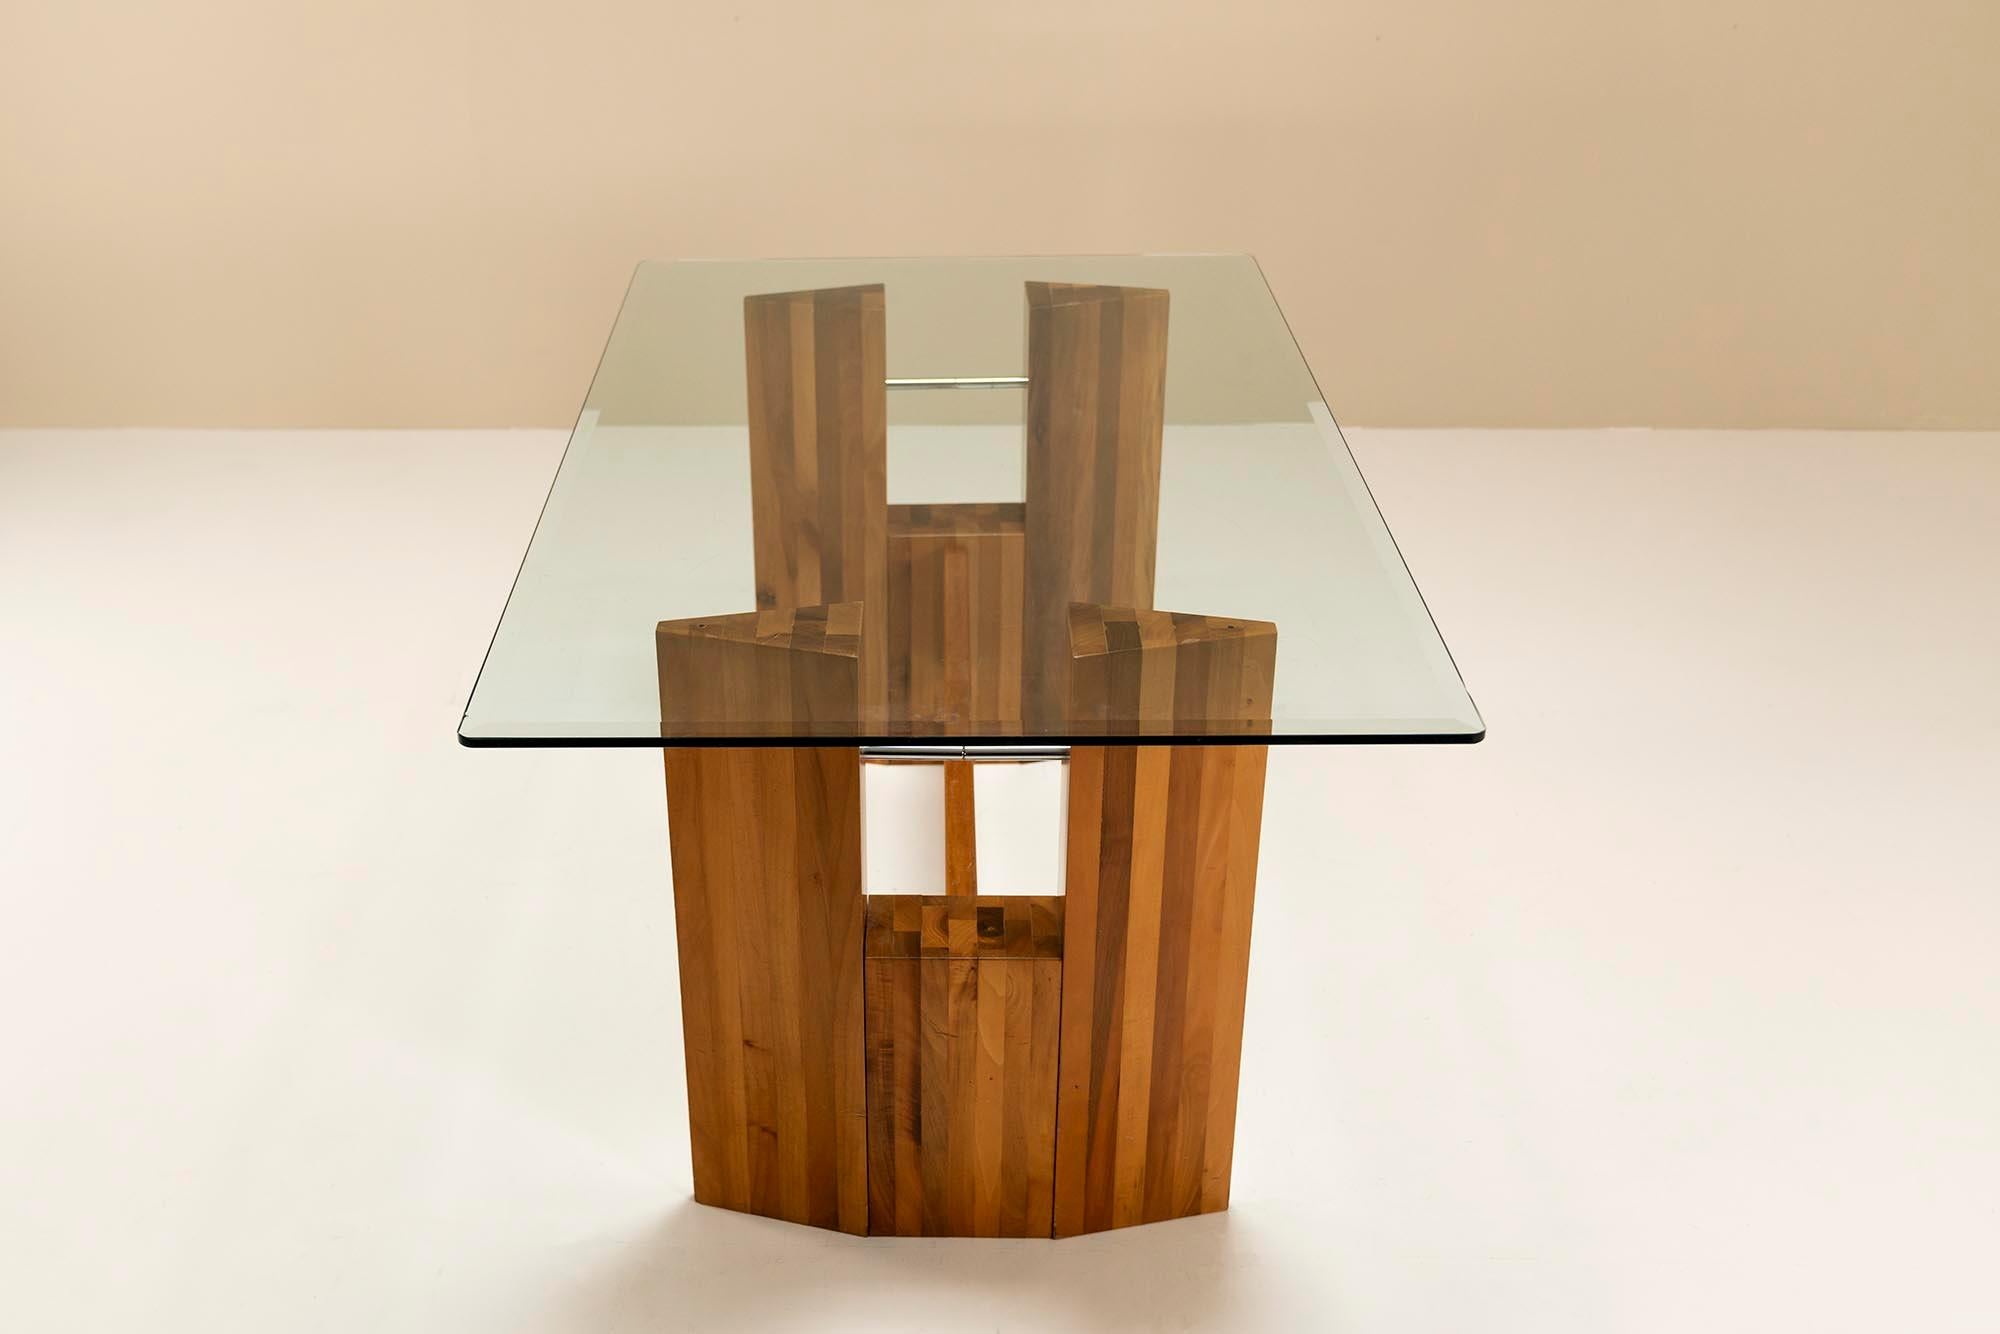 Architectural Table or Desk in Walnut and Glass, Italy 1970s For Sale 4